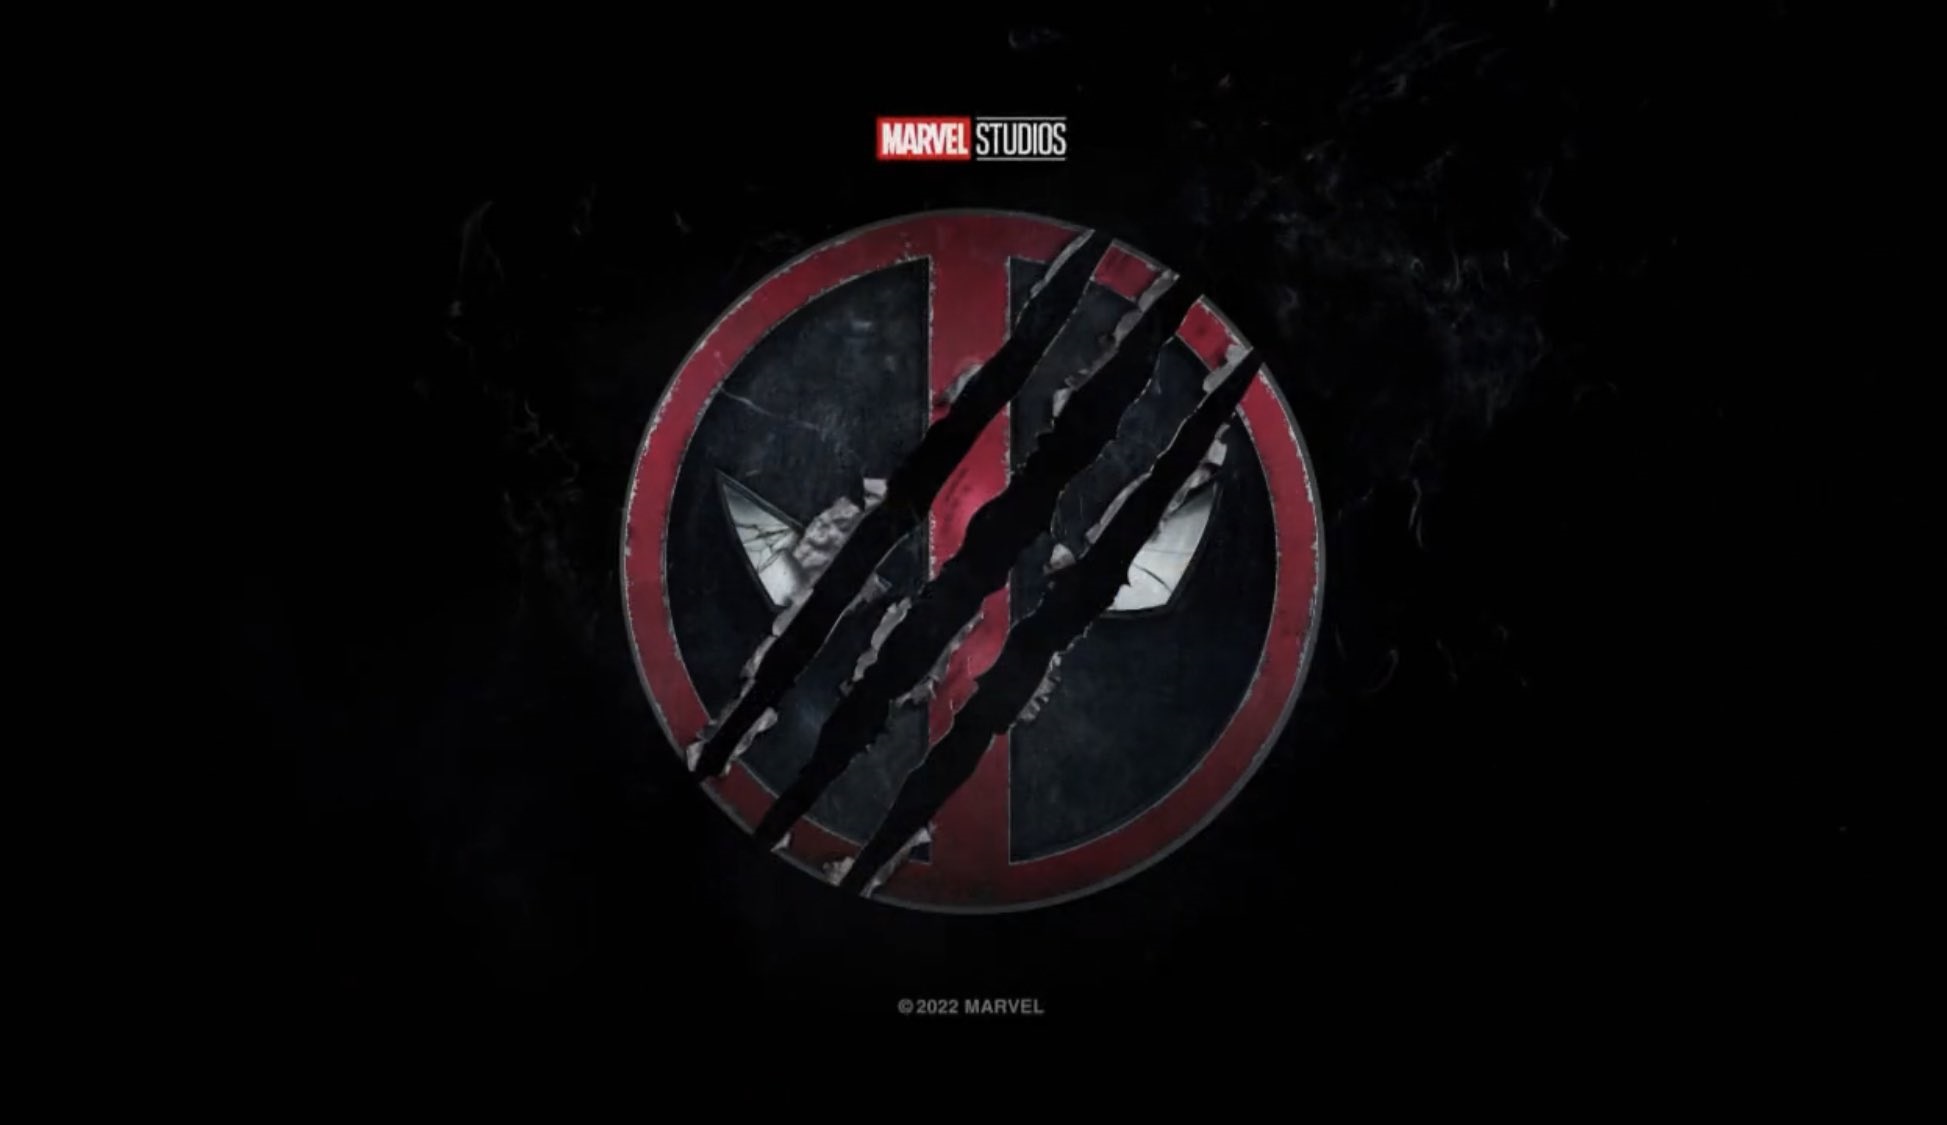 A screenshot of the official logo for Deadpool 3 on a black background